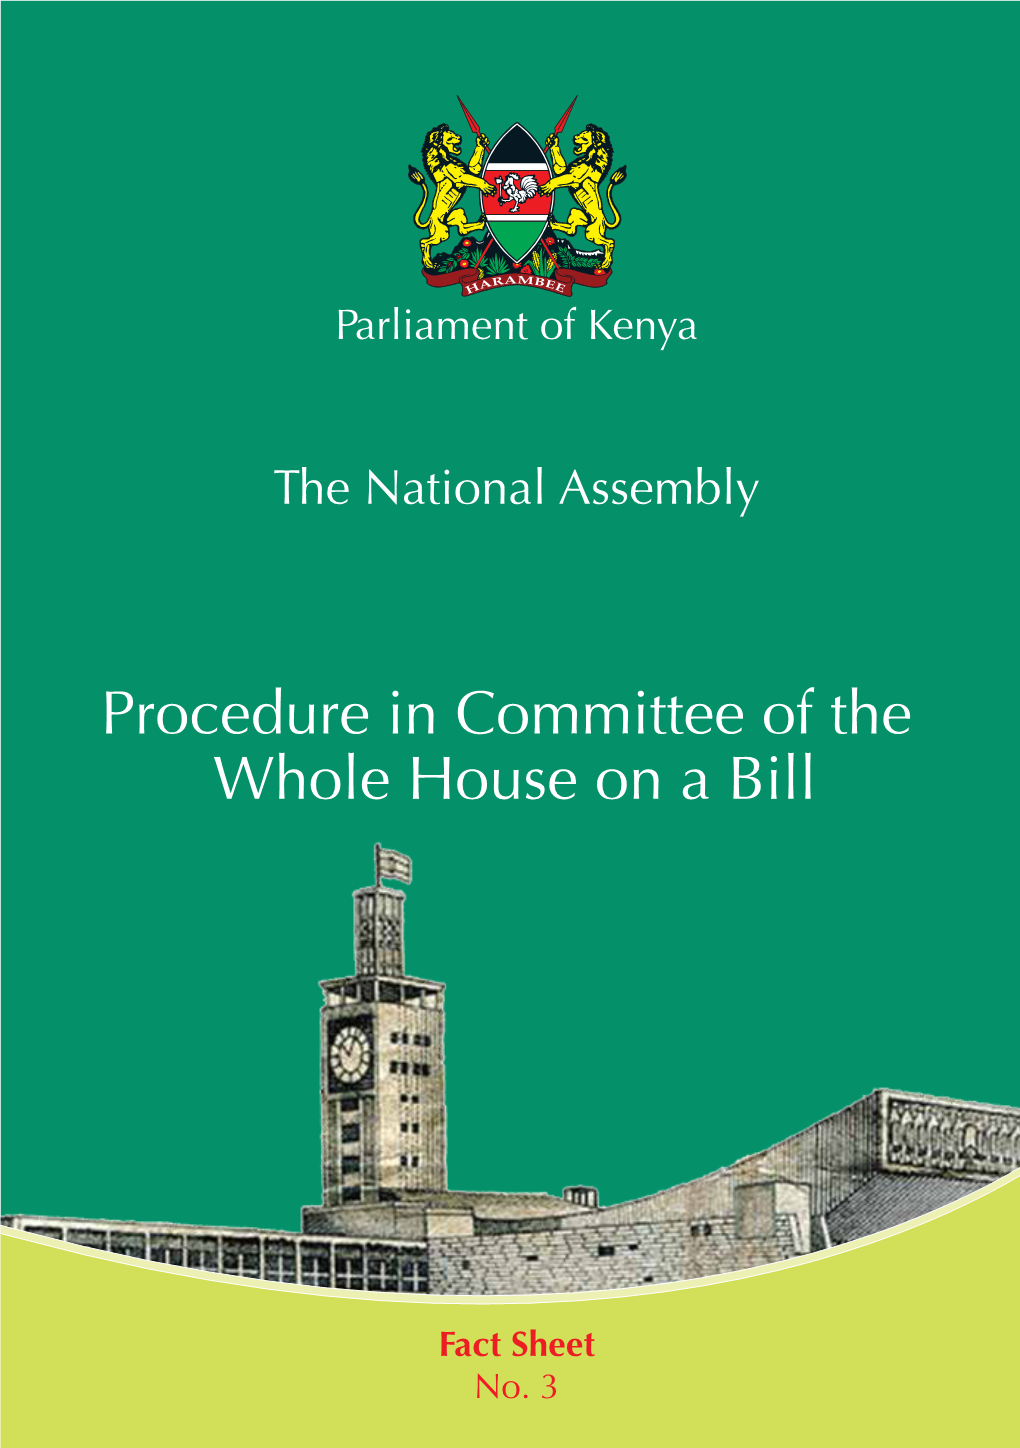 Procedure in Committee on a Whole House on a Bill